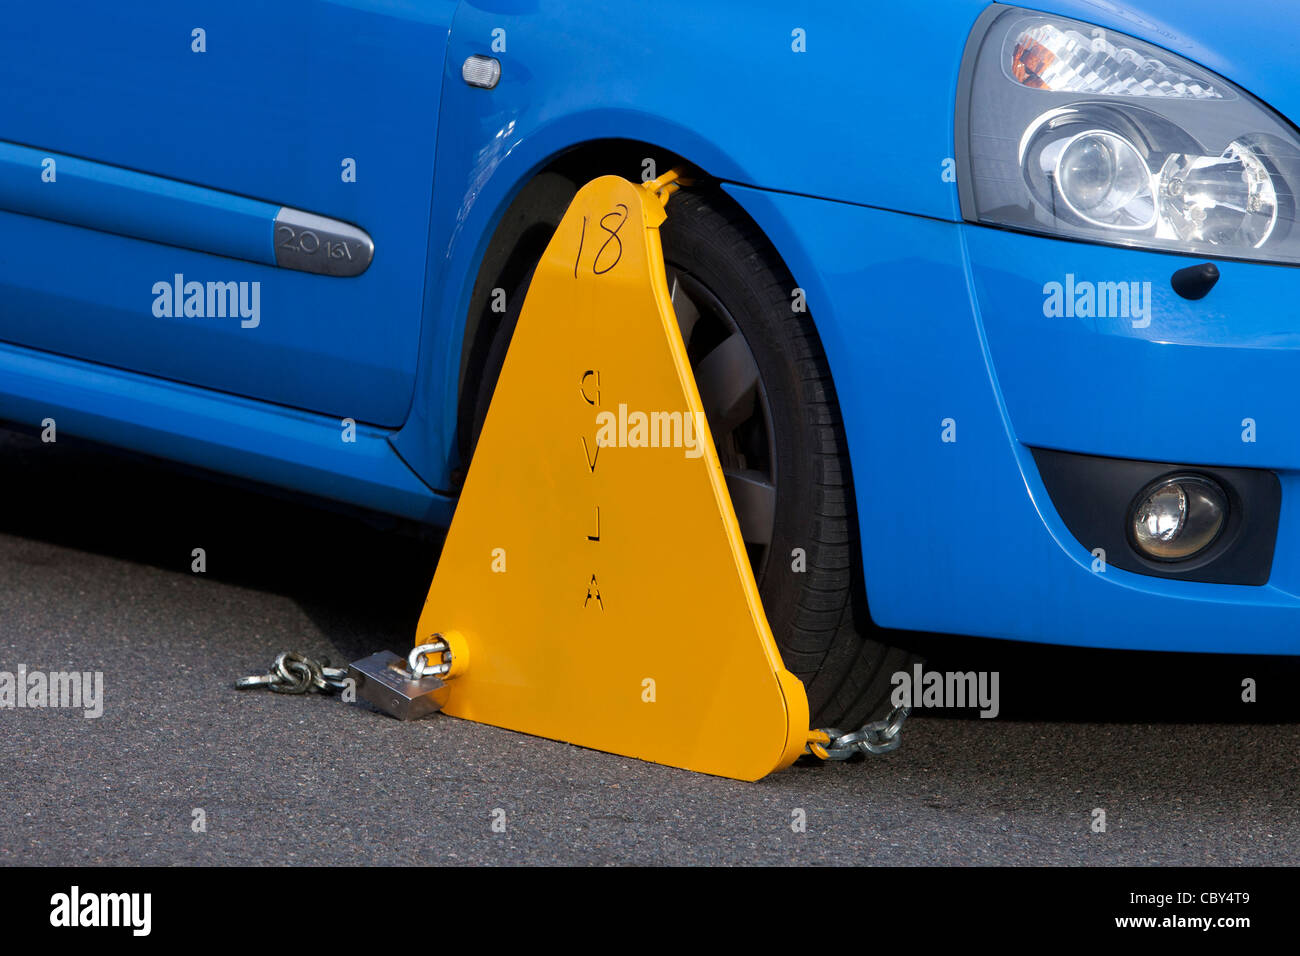 Untaxed vehicle with DVLA wheel clamp on a UK street Stock Photo